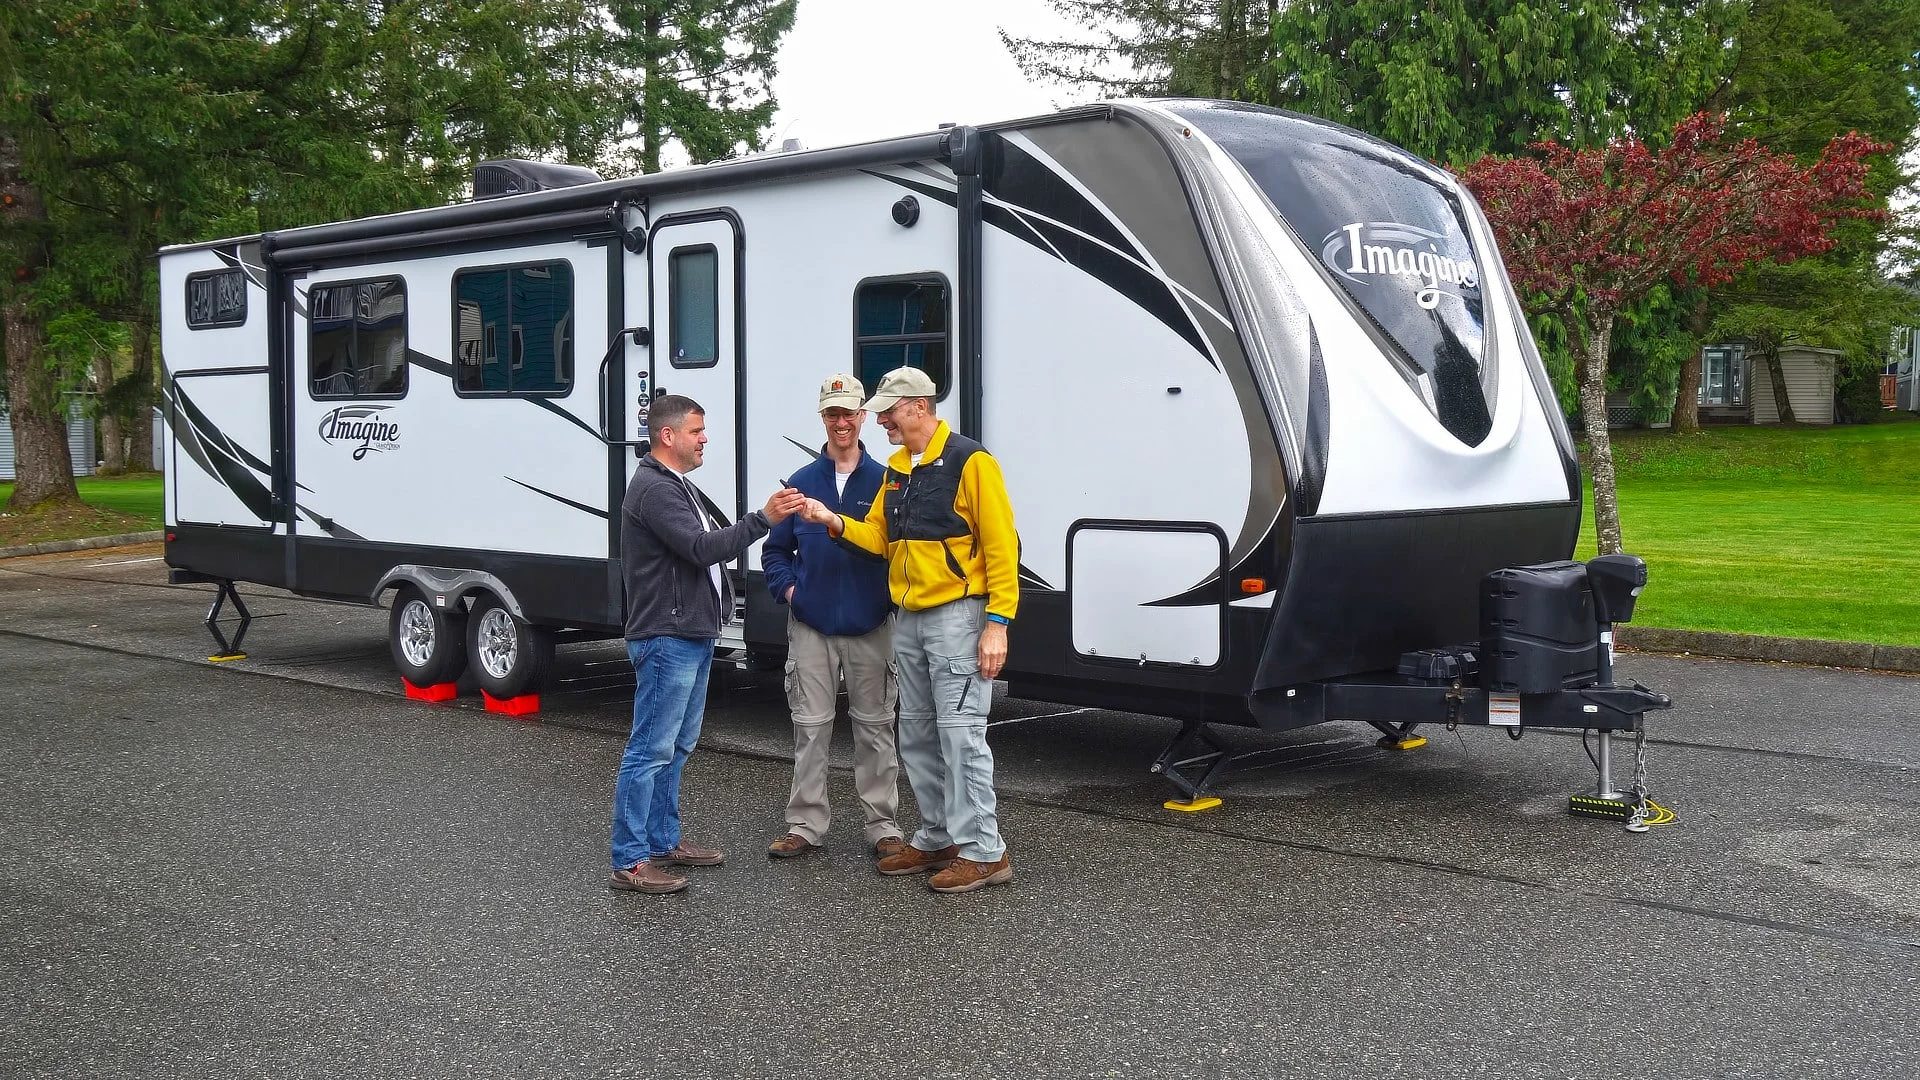 RV living tips are shown in this photo of The RVgeeks leveling a travel trailer with a friend.